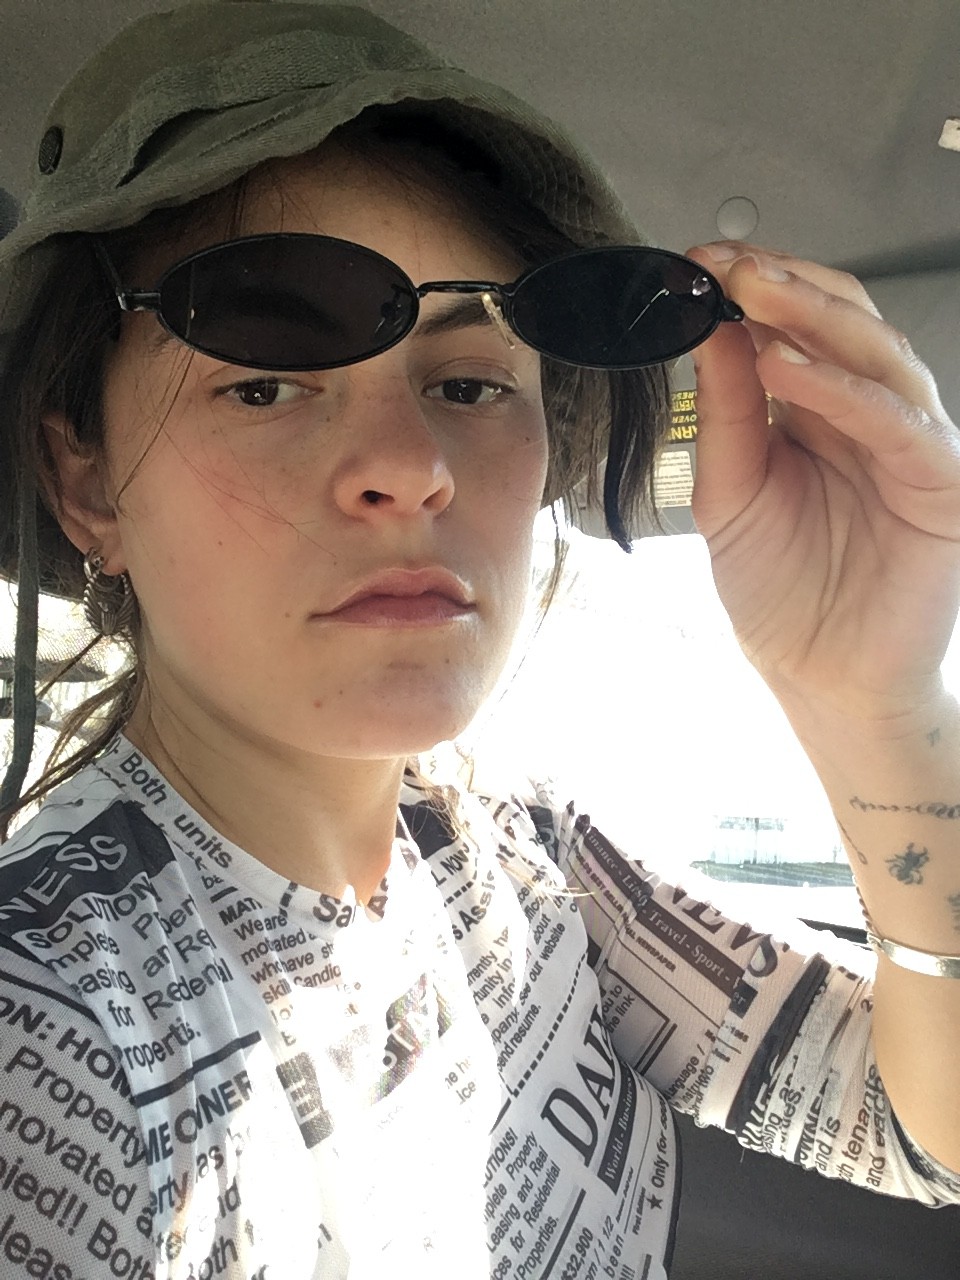 Kayla Ephros is sitting in a car, wearing a shirt with newsprint design on it, lifting her sunglasses up to look at the camera